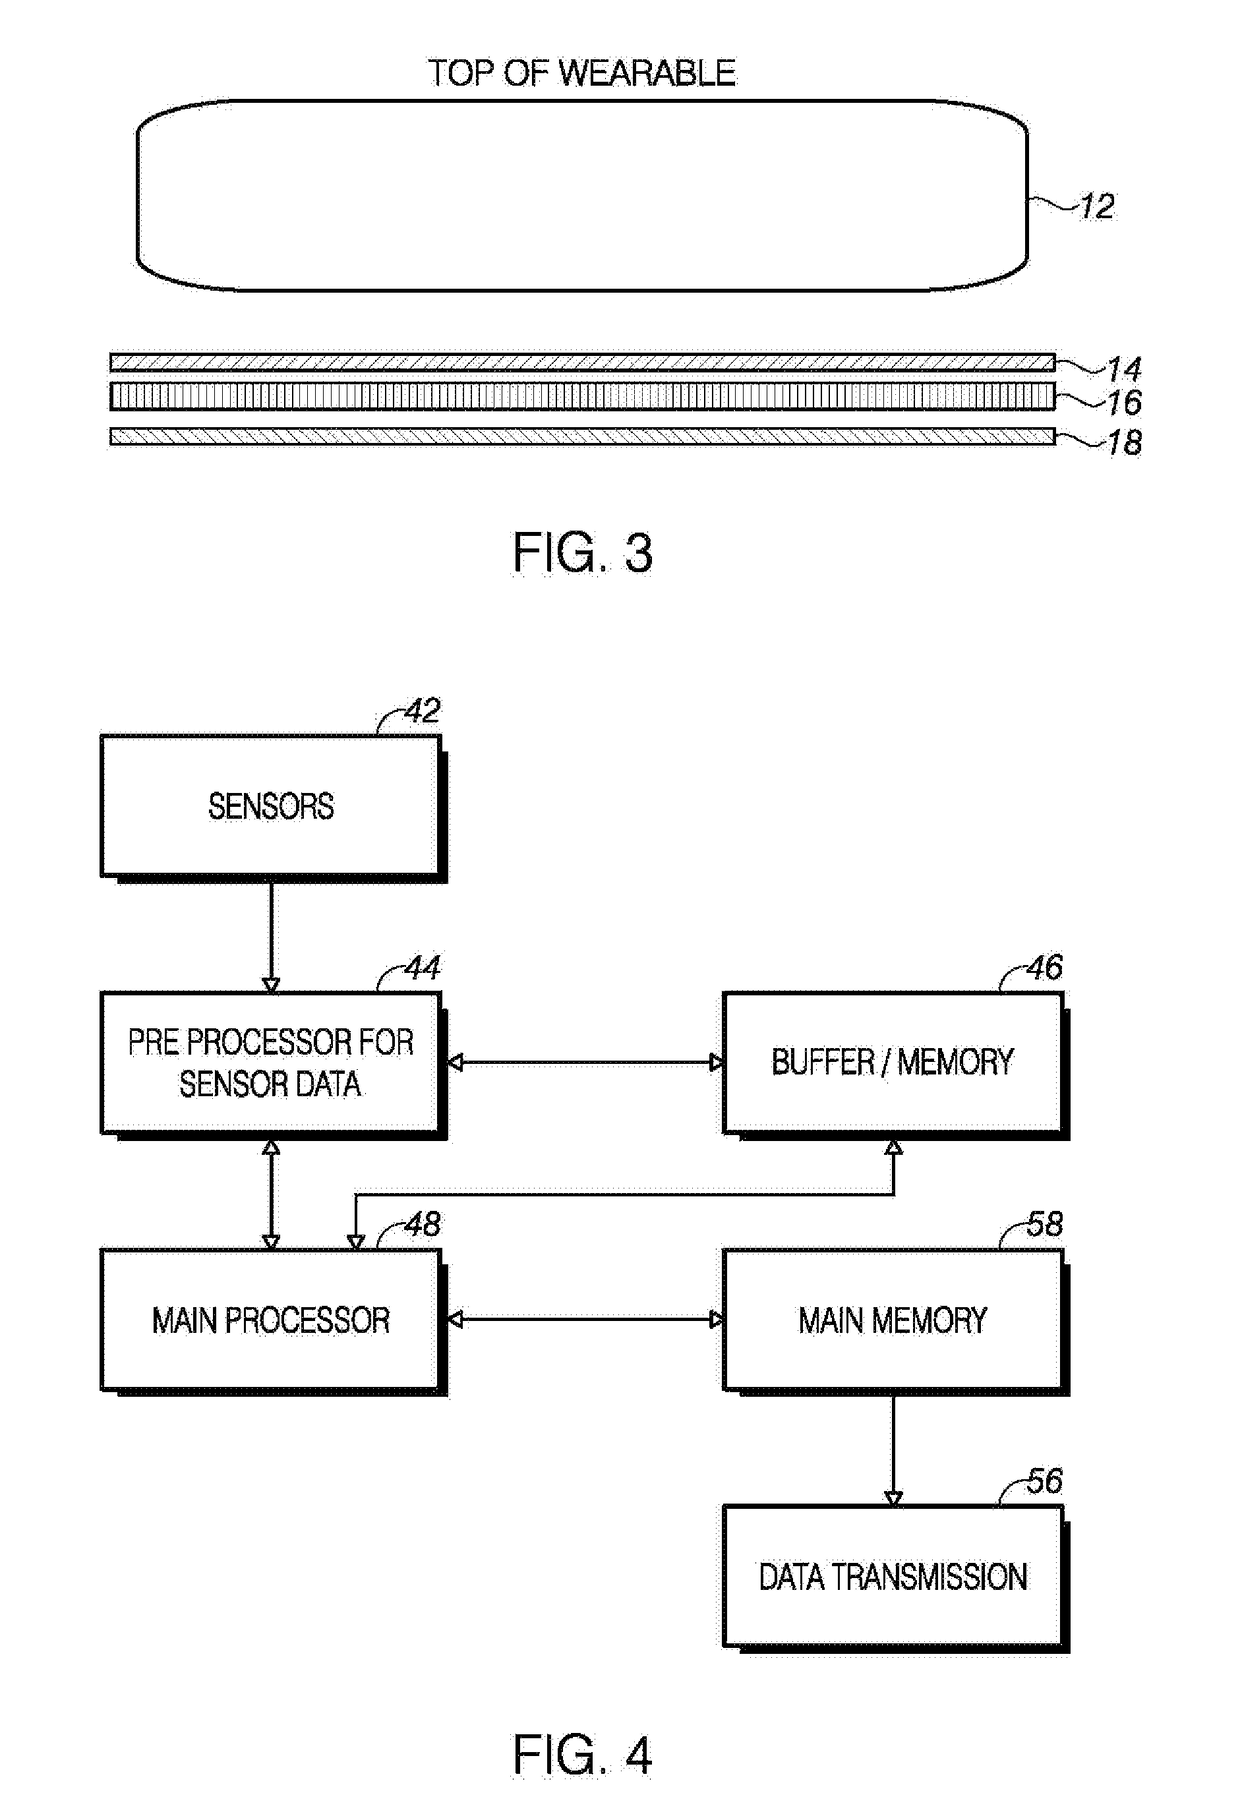 Wearable physiological monitoring systems and methods